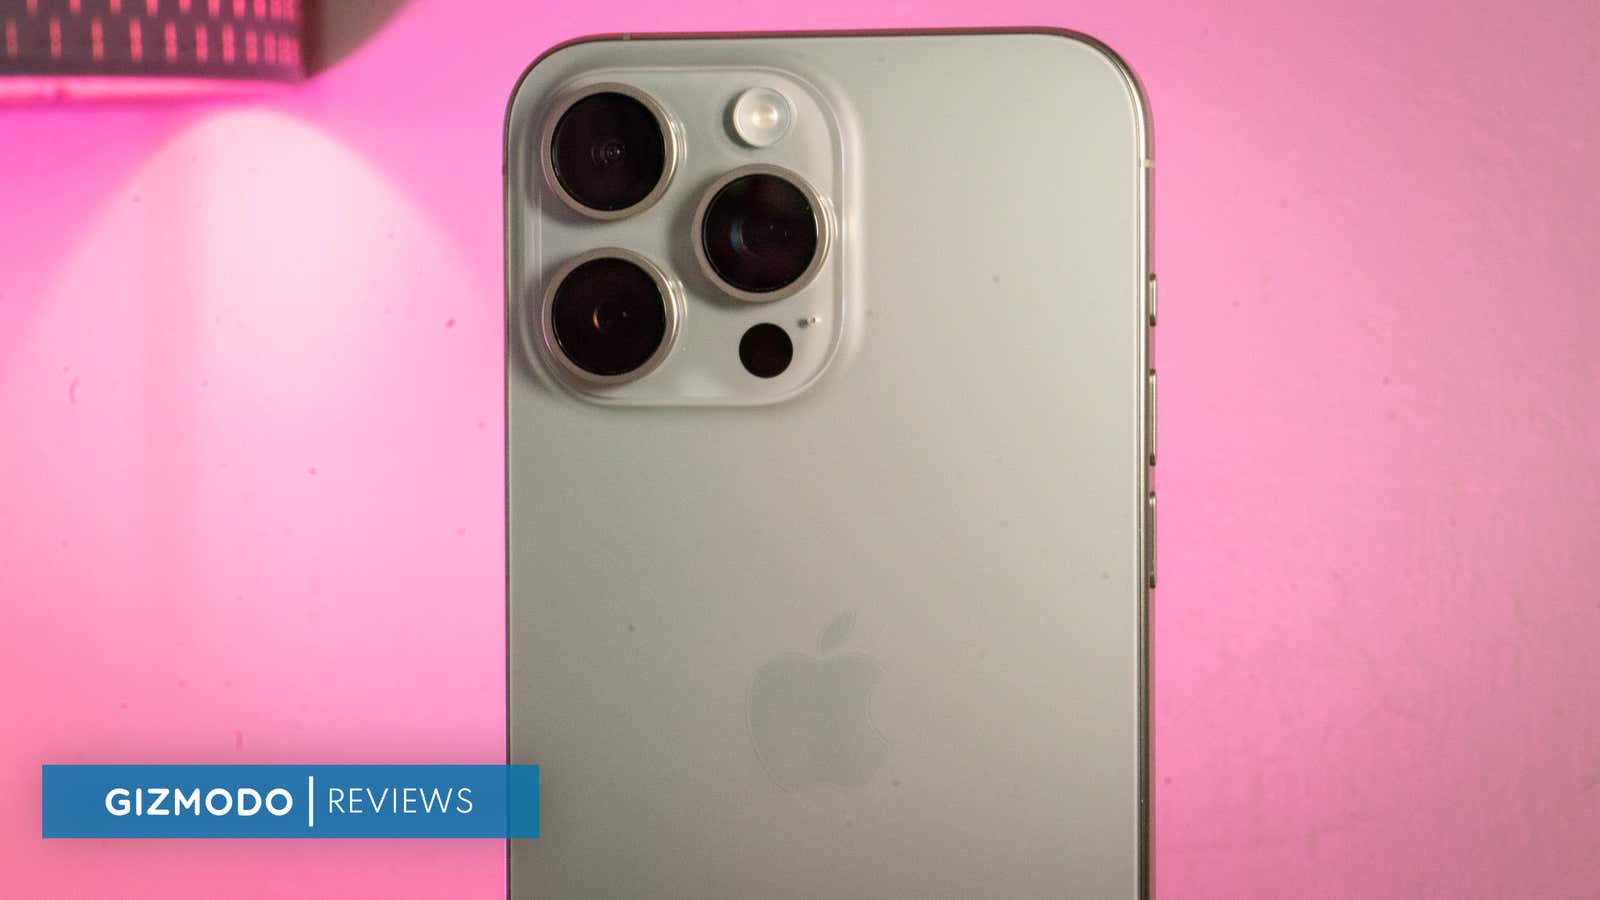 UNBOXING iPhone 15 Model - Apple DID IT! 